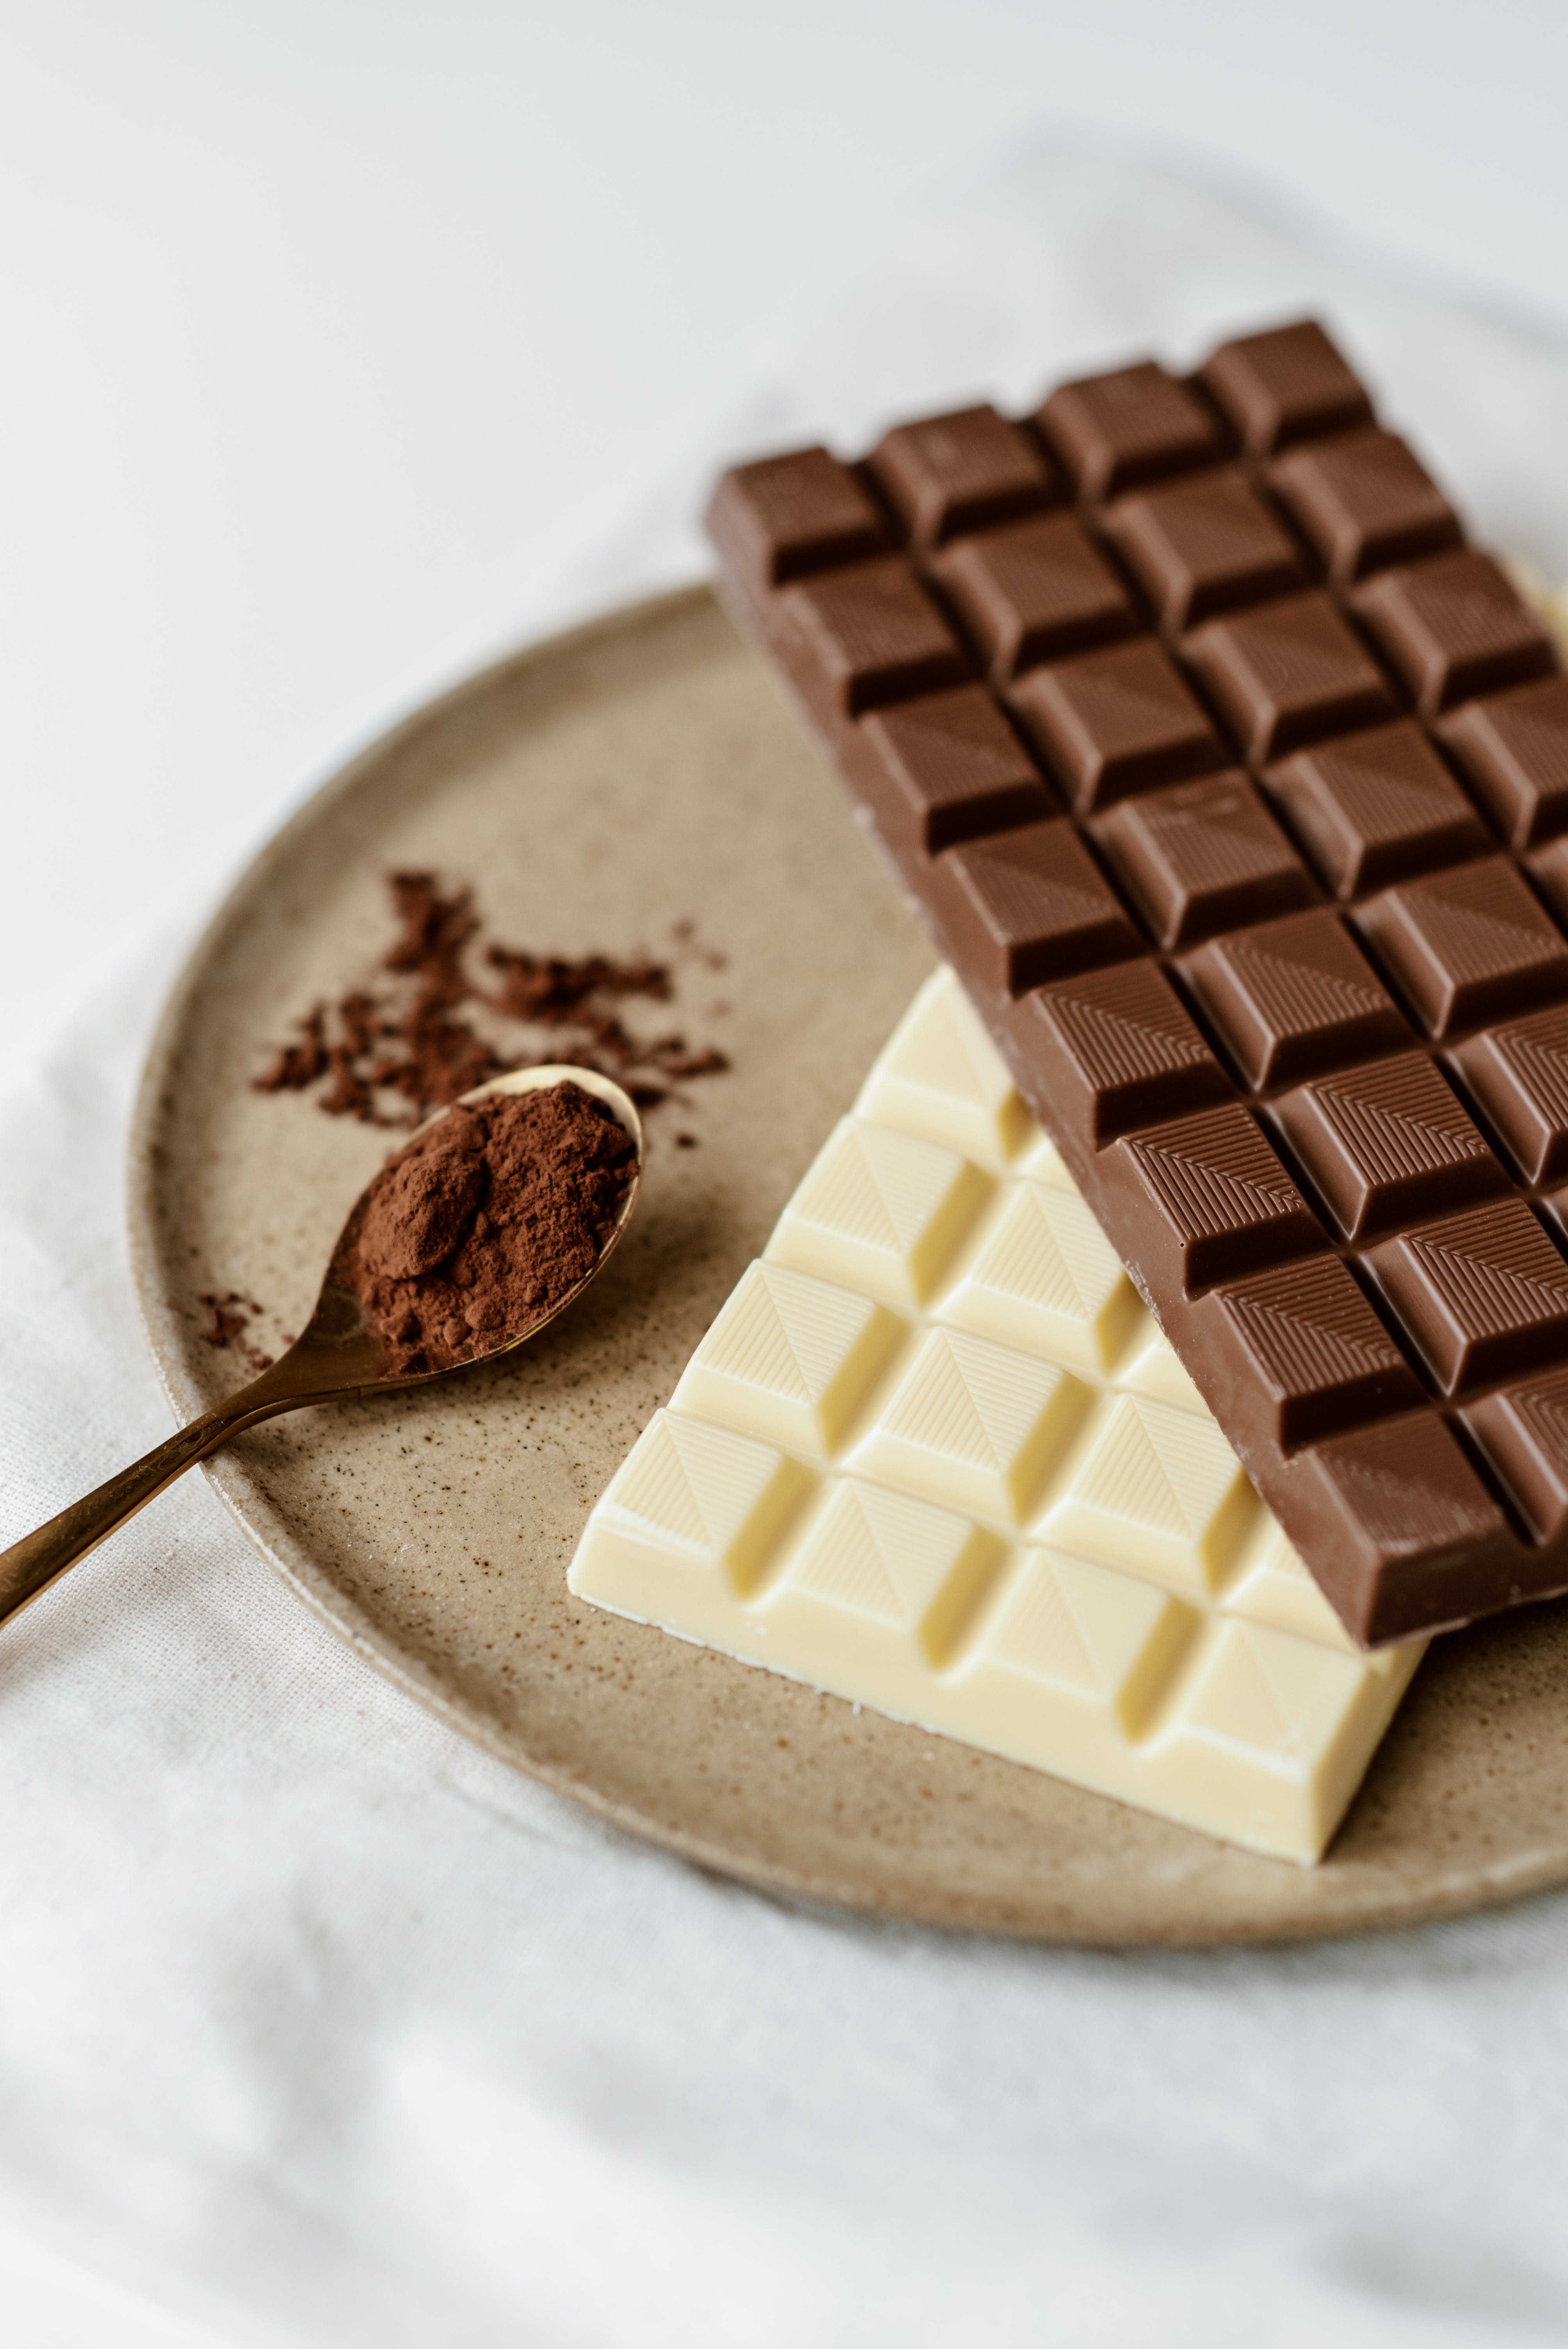 An image of chocolate in cooking to represent seasoning in bulk.